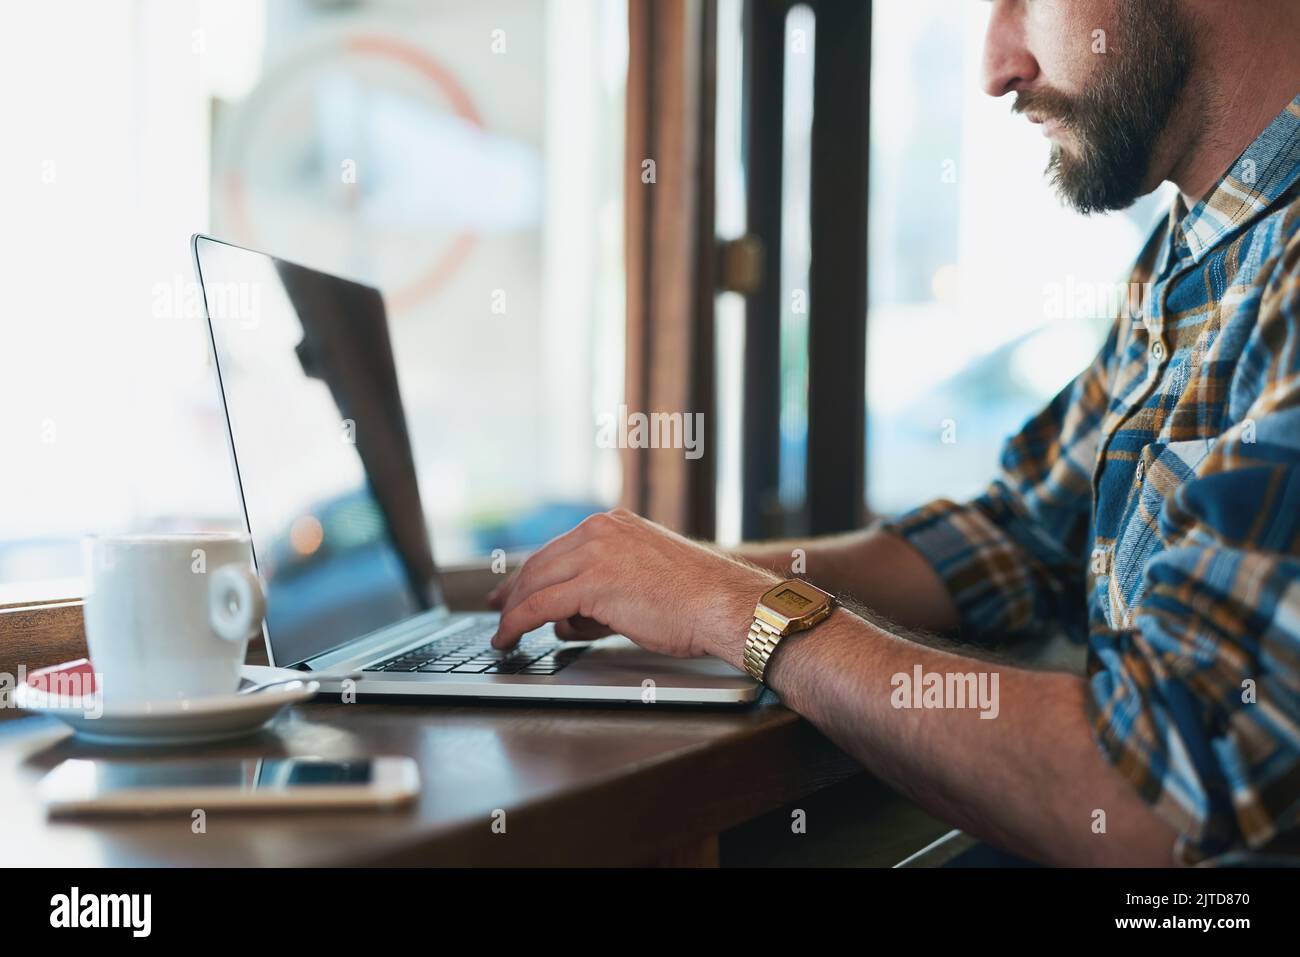 Finding inspiration in his favourite cafe. a young man using his laptop while sitting by the window in a cafe. Stock Photo